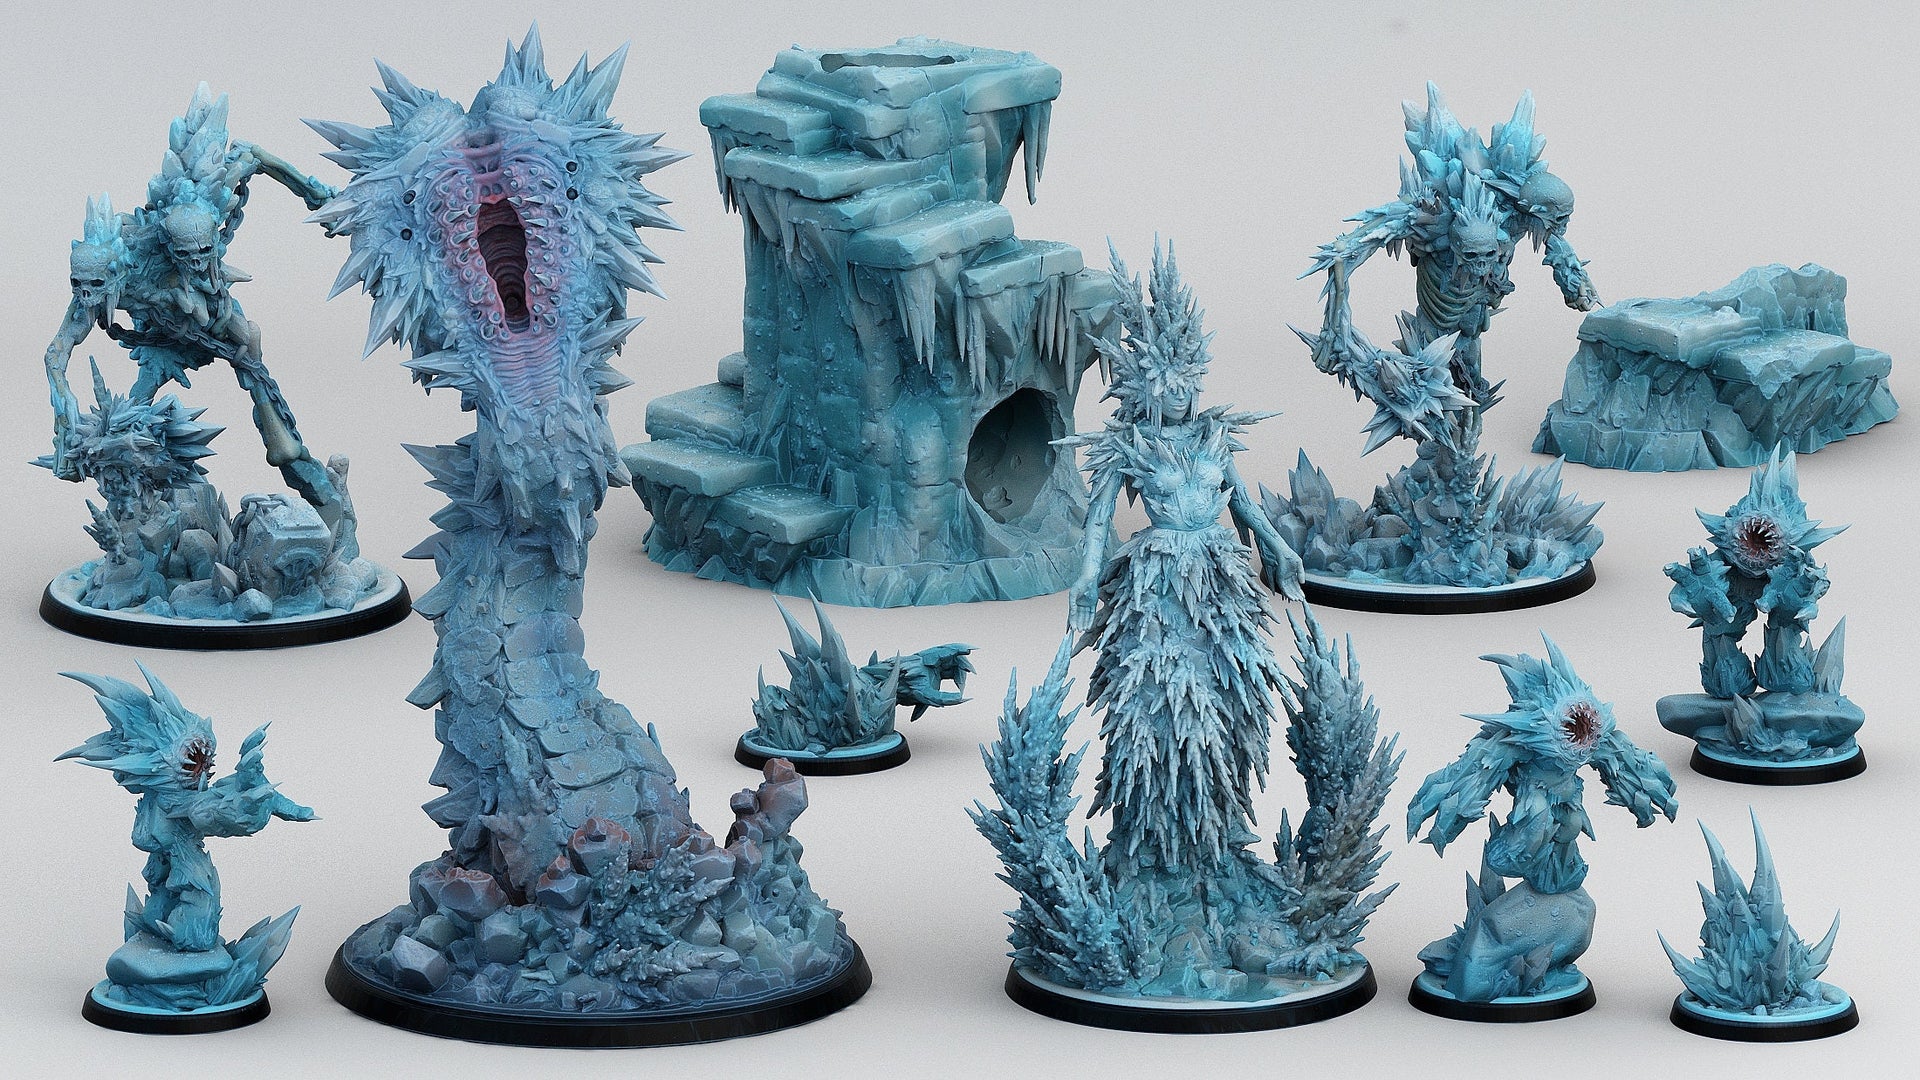 Ice Creatures - Print Your Monsters 